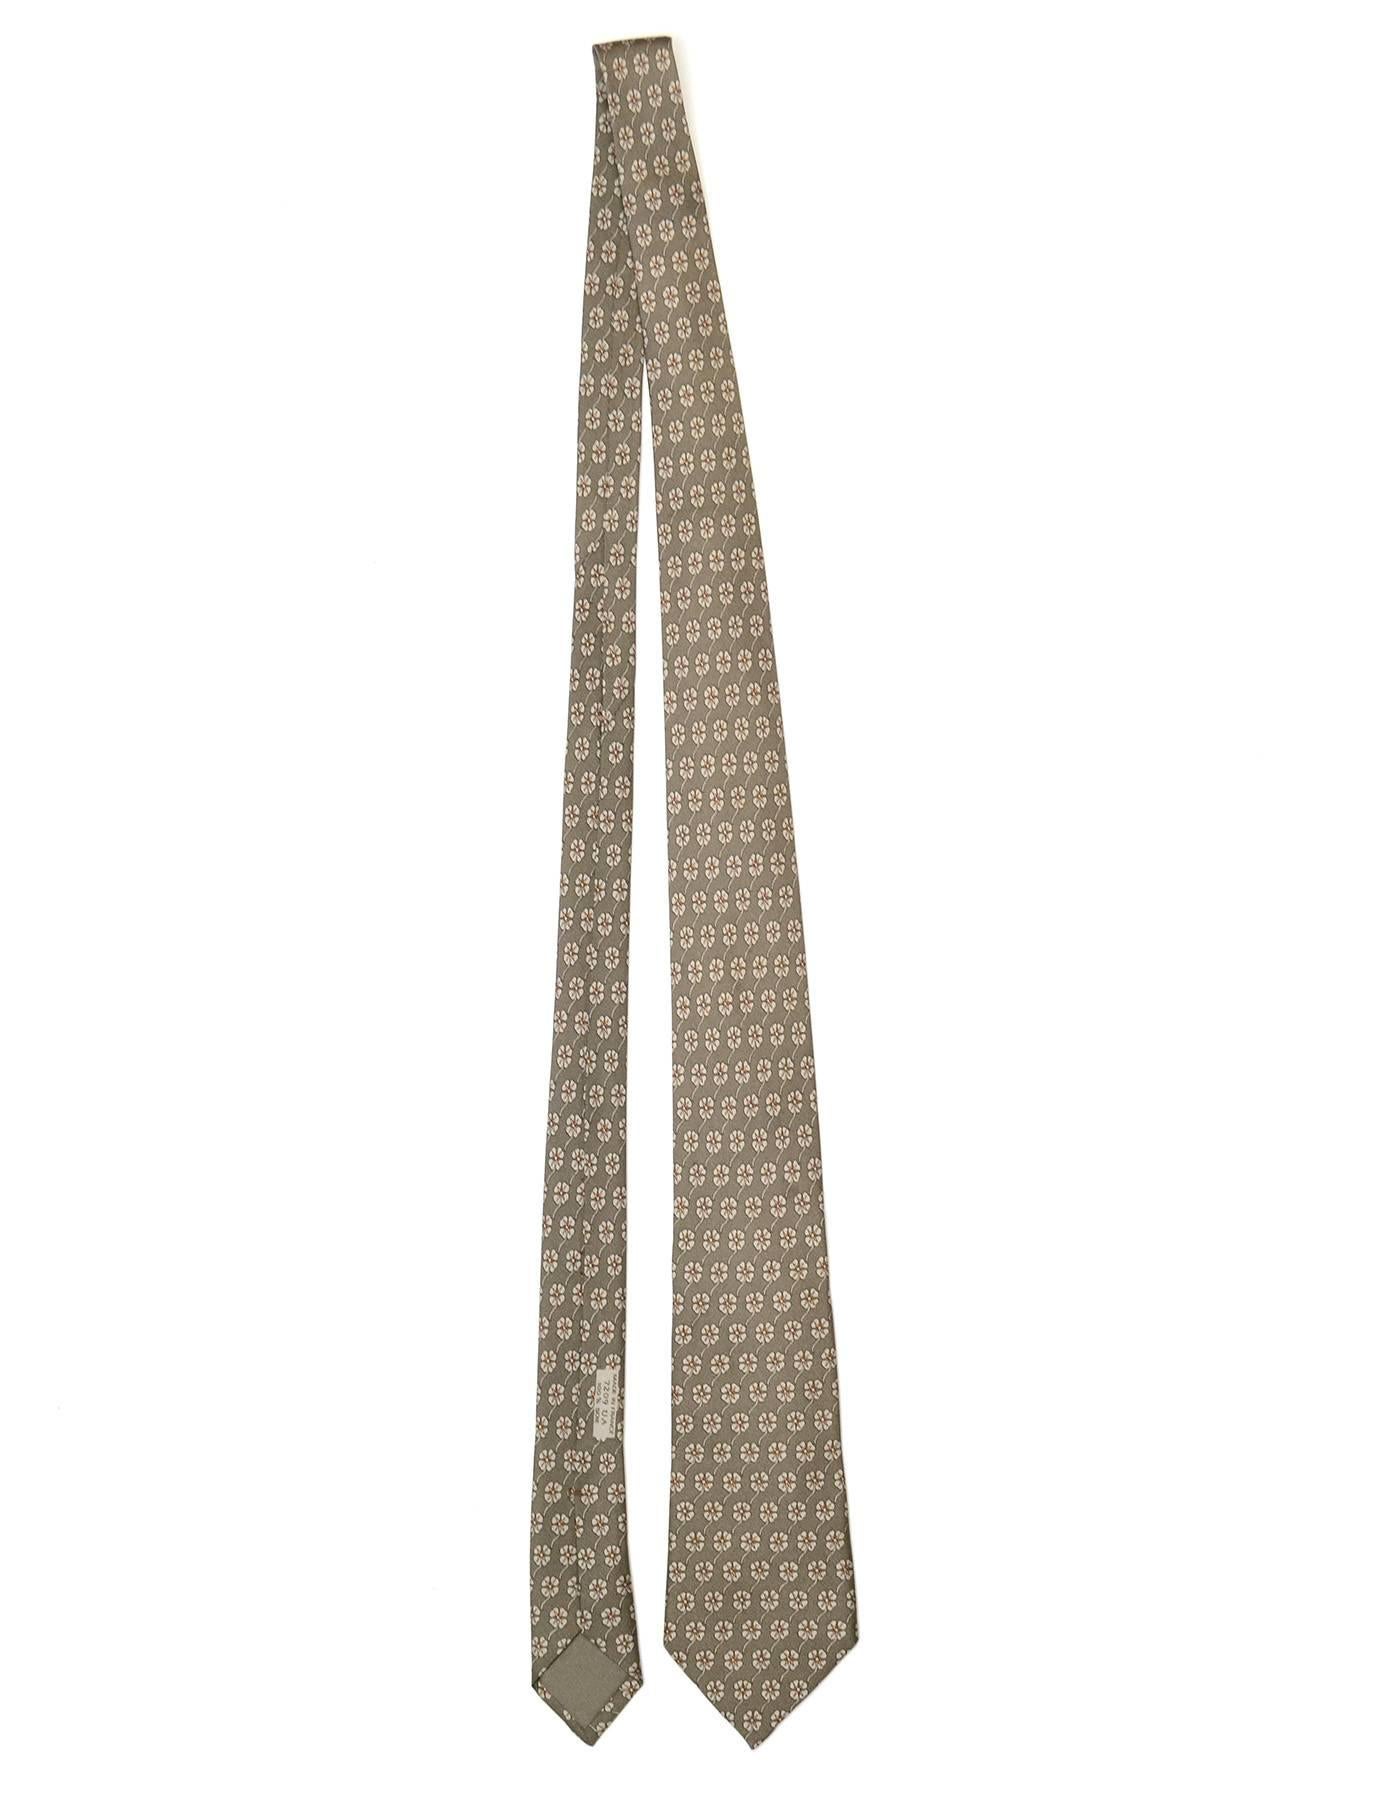 Hermes Grey Floral Print Silk Tie

Made In: France
Color: Grey
Composition: 100% silk
Retail Price: $180 + tax
Overall Condition: Excellent pre-owned condition
Measurements: 
Length: 58"
Width: 1.75"-3.5"